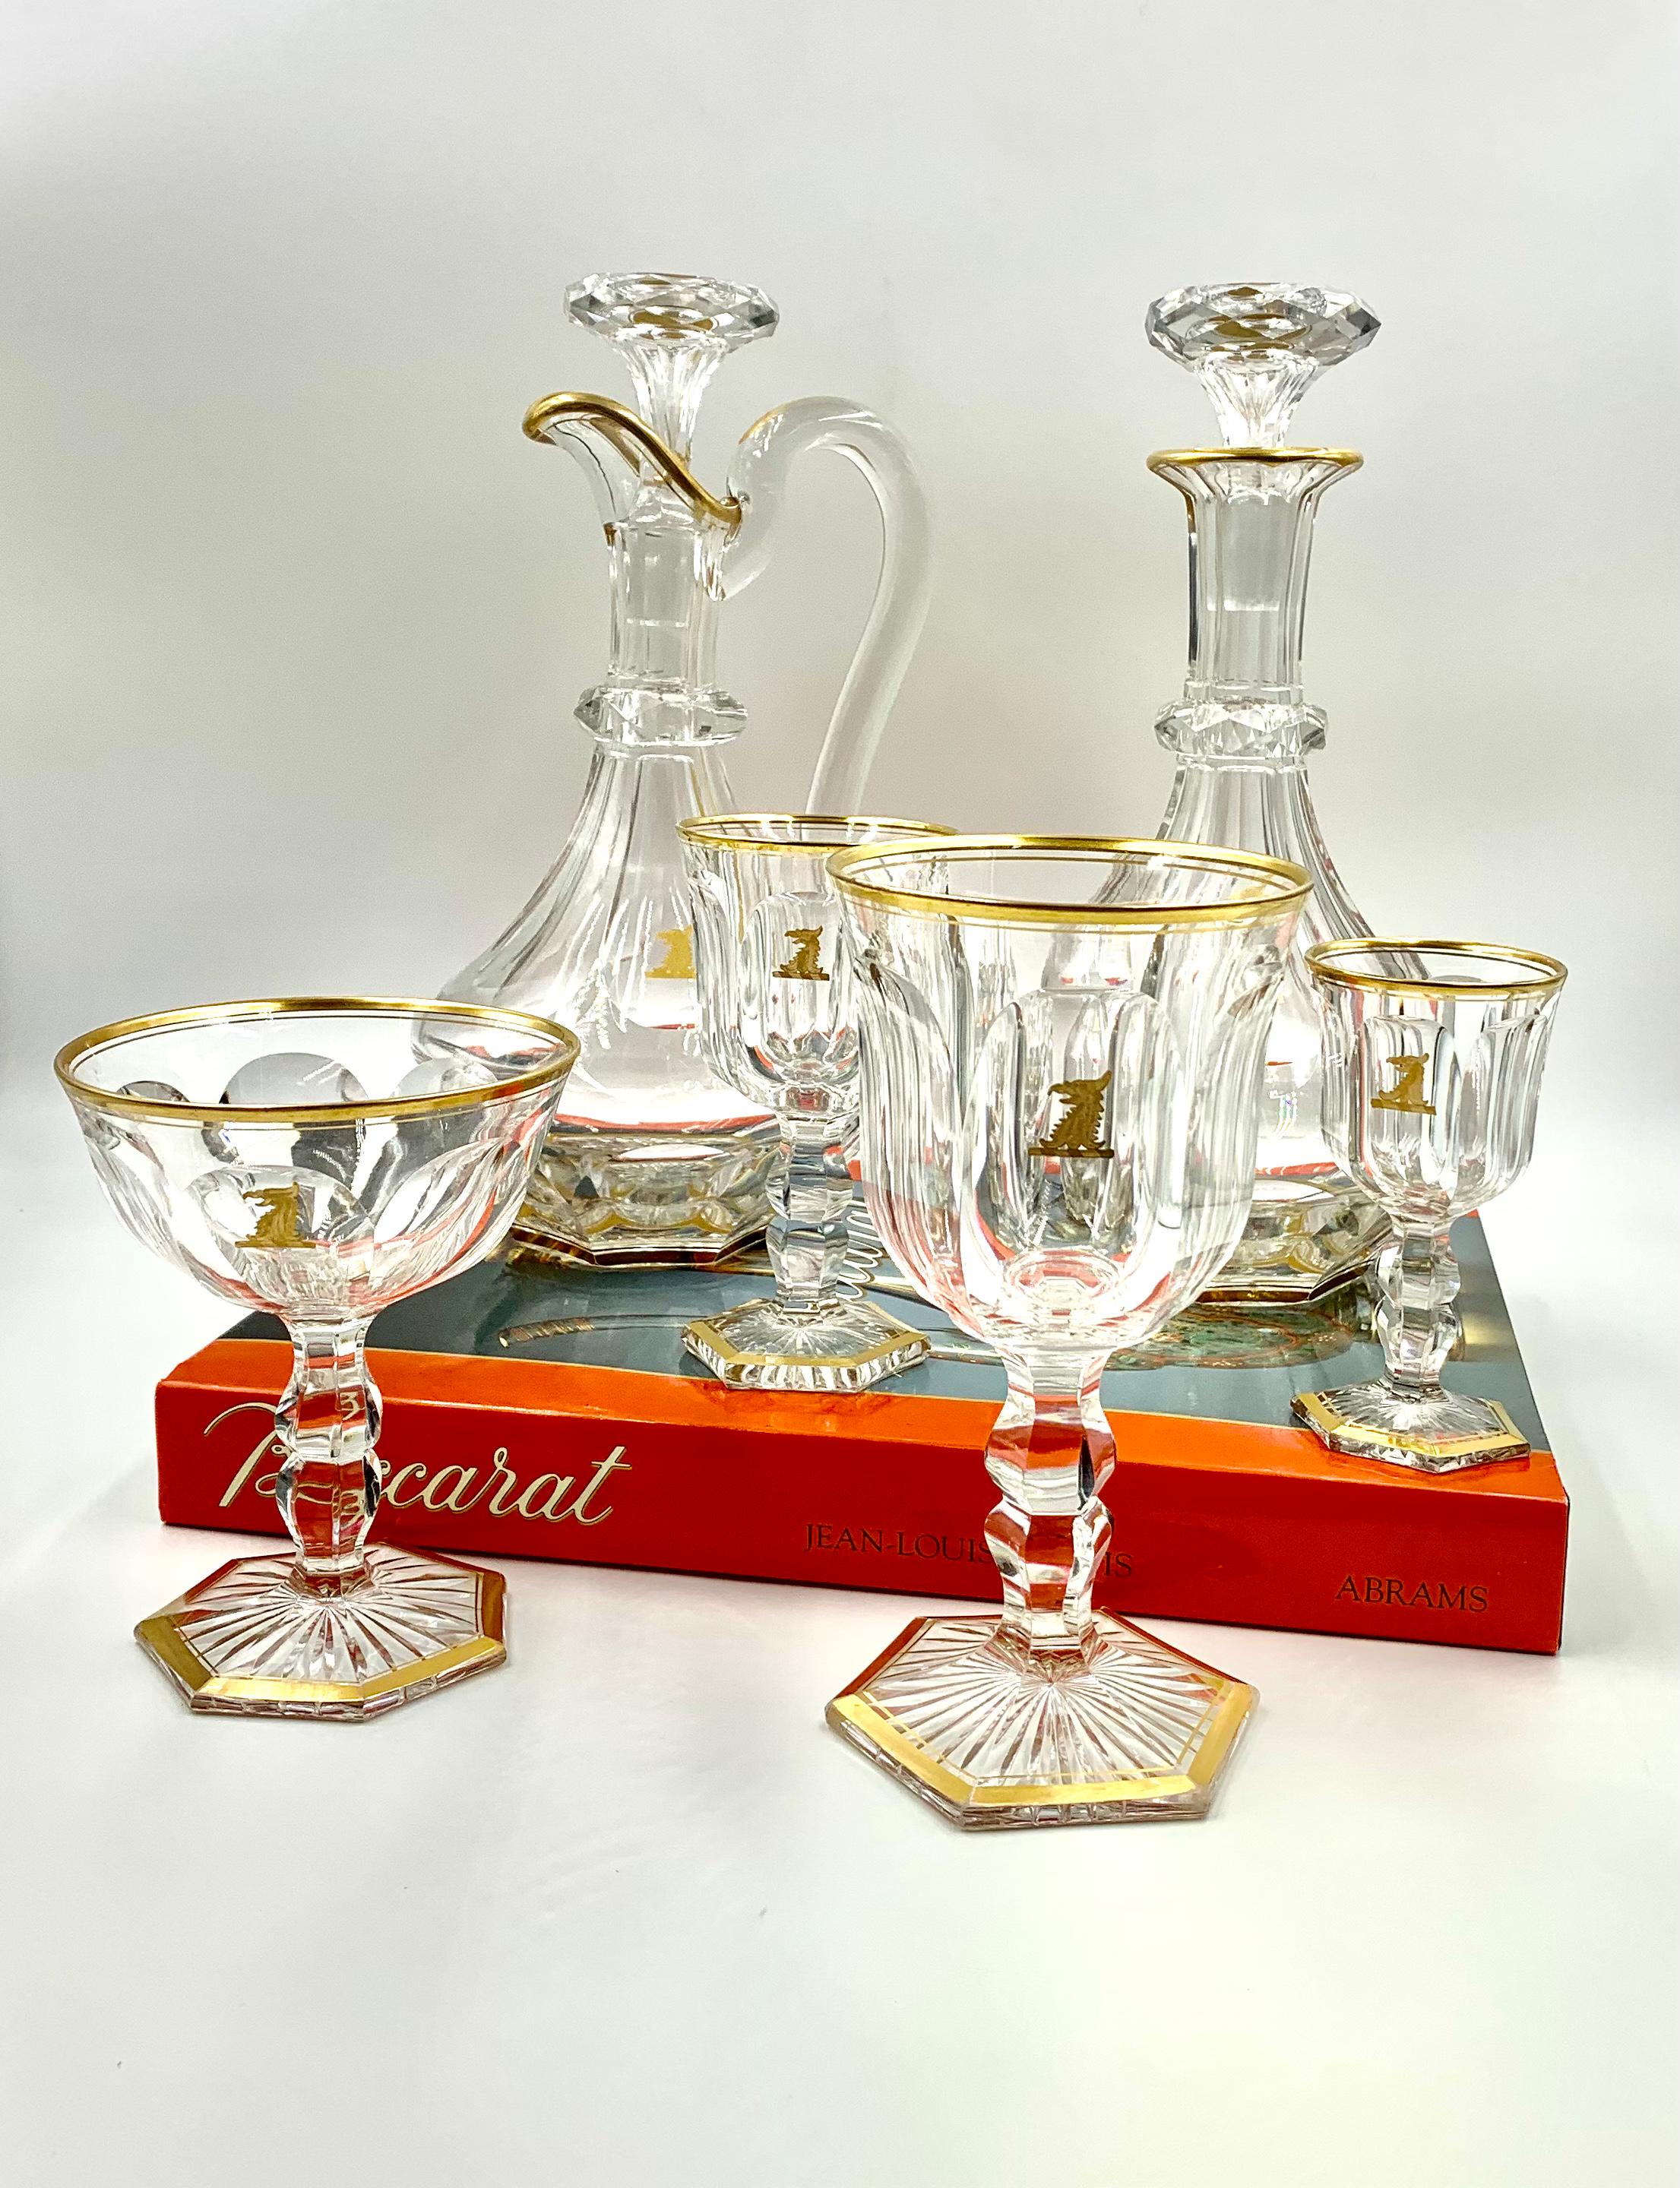 Historically significant Baccarat Empire Simson Armorial Crest stemware service for 8 - champagne, wine, water and liqueur glasses and two superb wine decanters, each piece bearing the Simson crest
19th Century
The Armorial crest is almost certainly